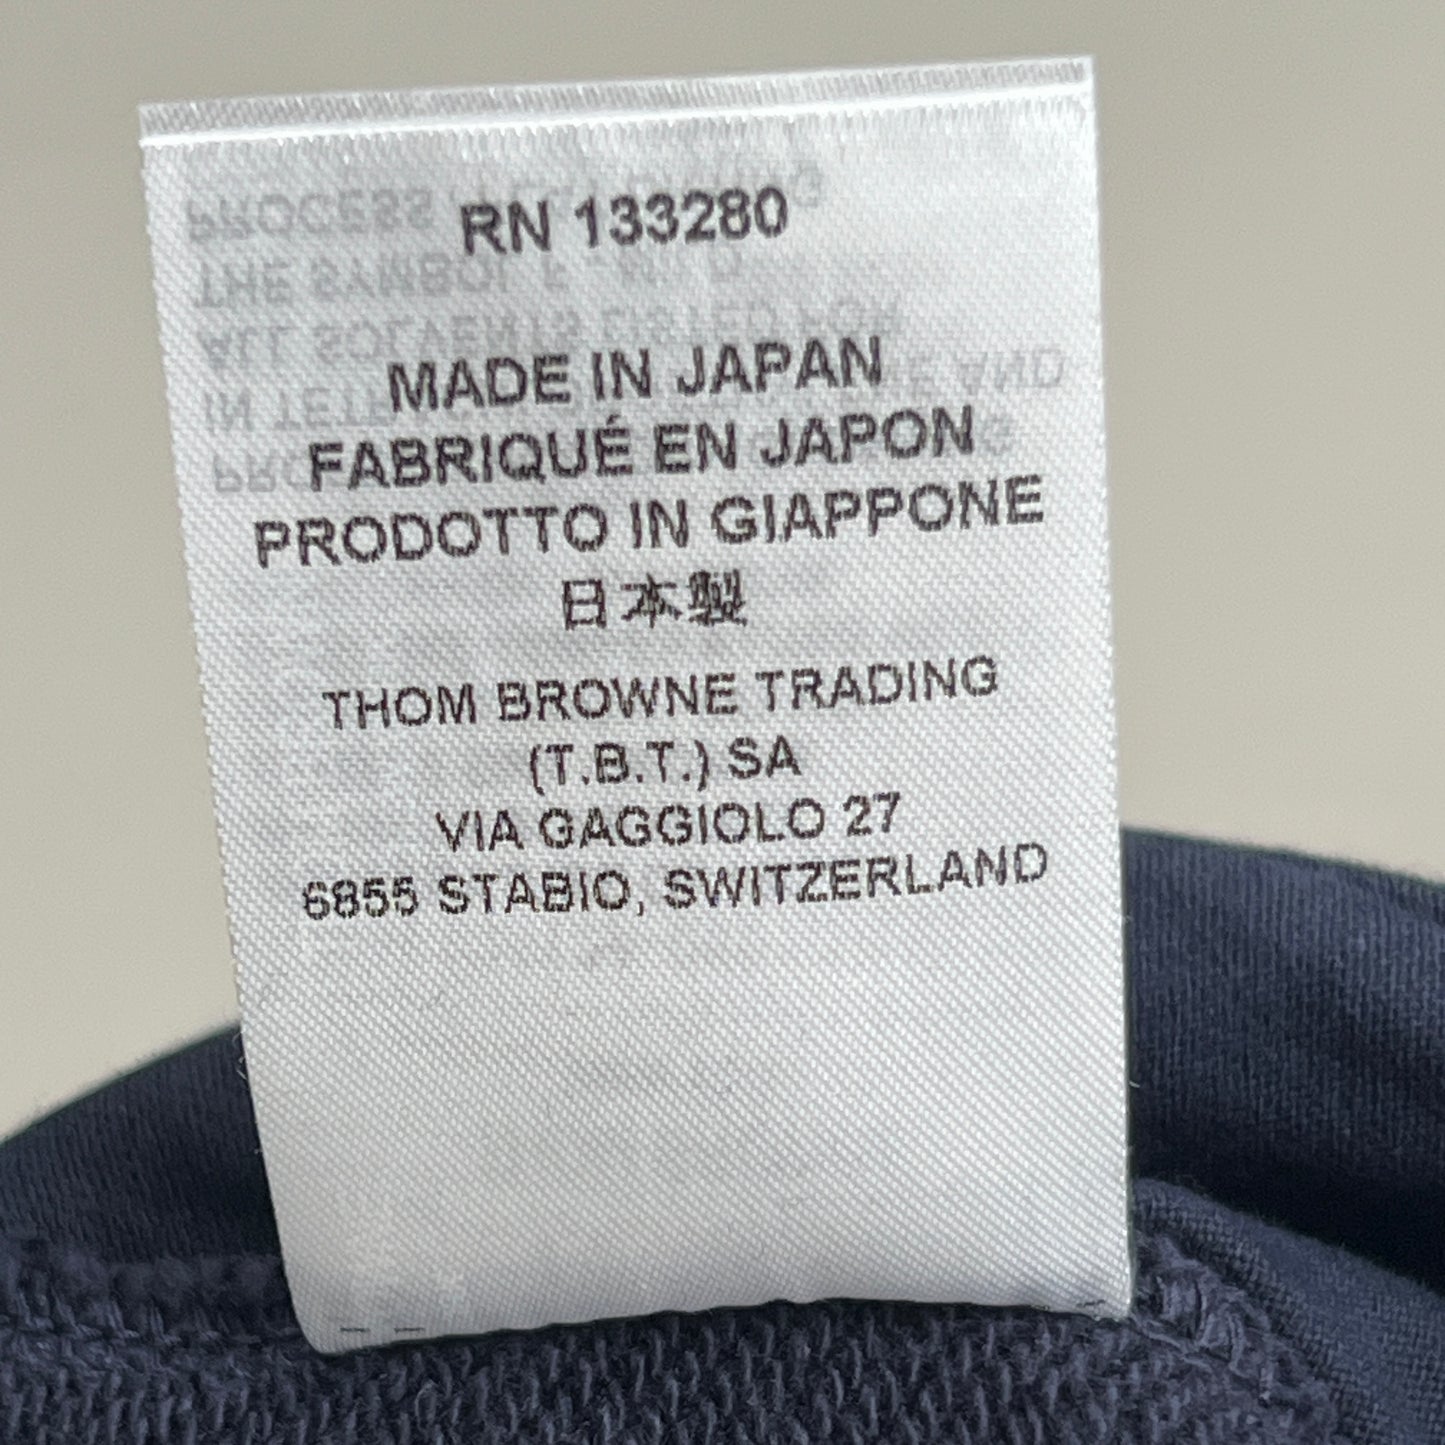 THOM BROWNE Classic Sweat Shorts in Tonal 4 Bar Loop Back Navy Size 3 (New)